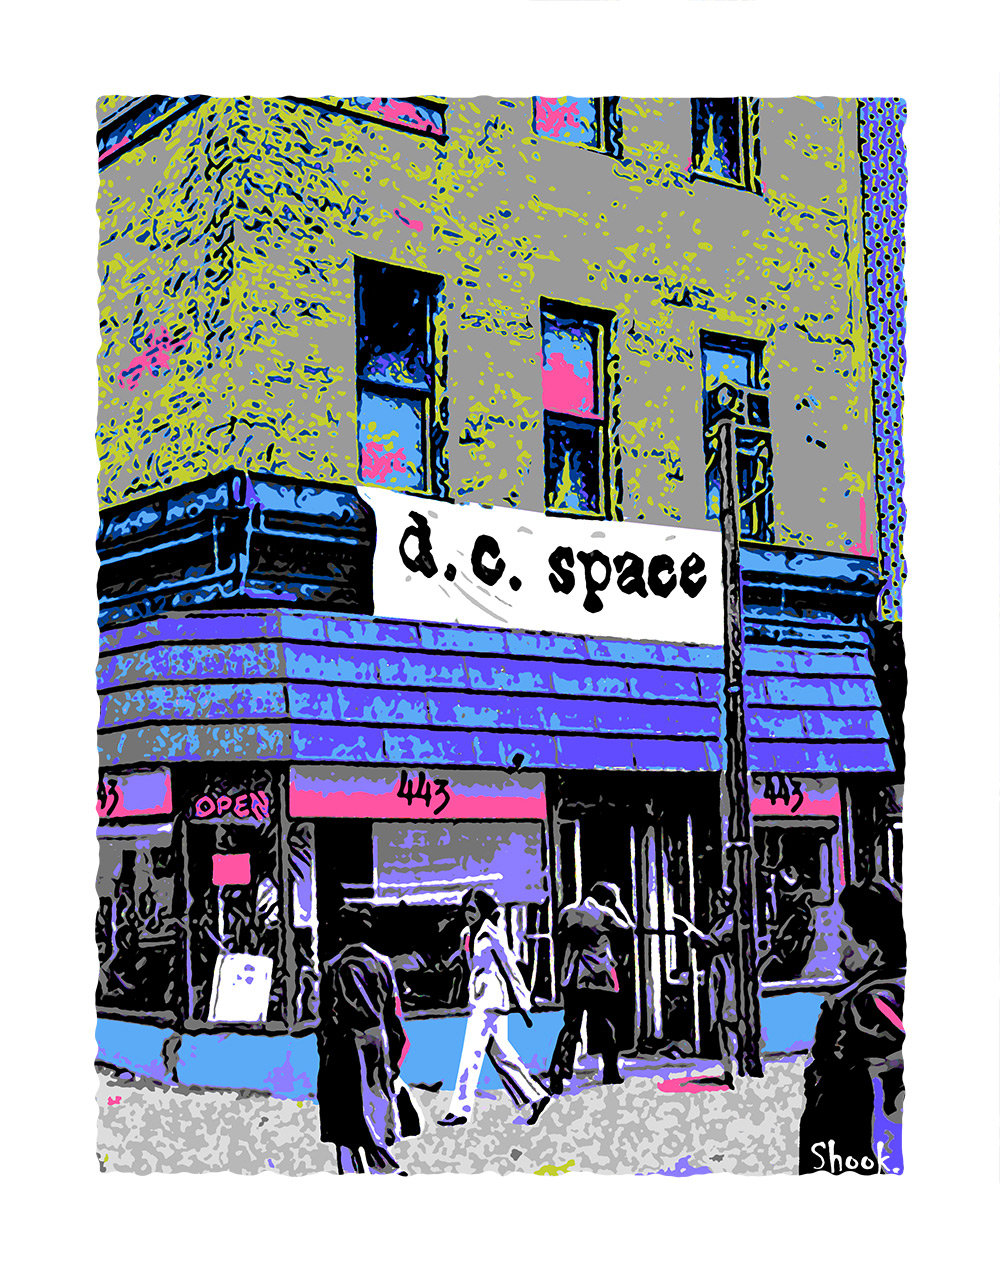 DC Space "Lunchtime" Giclée Art Print (Multi-size options)